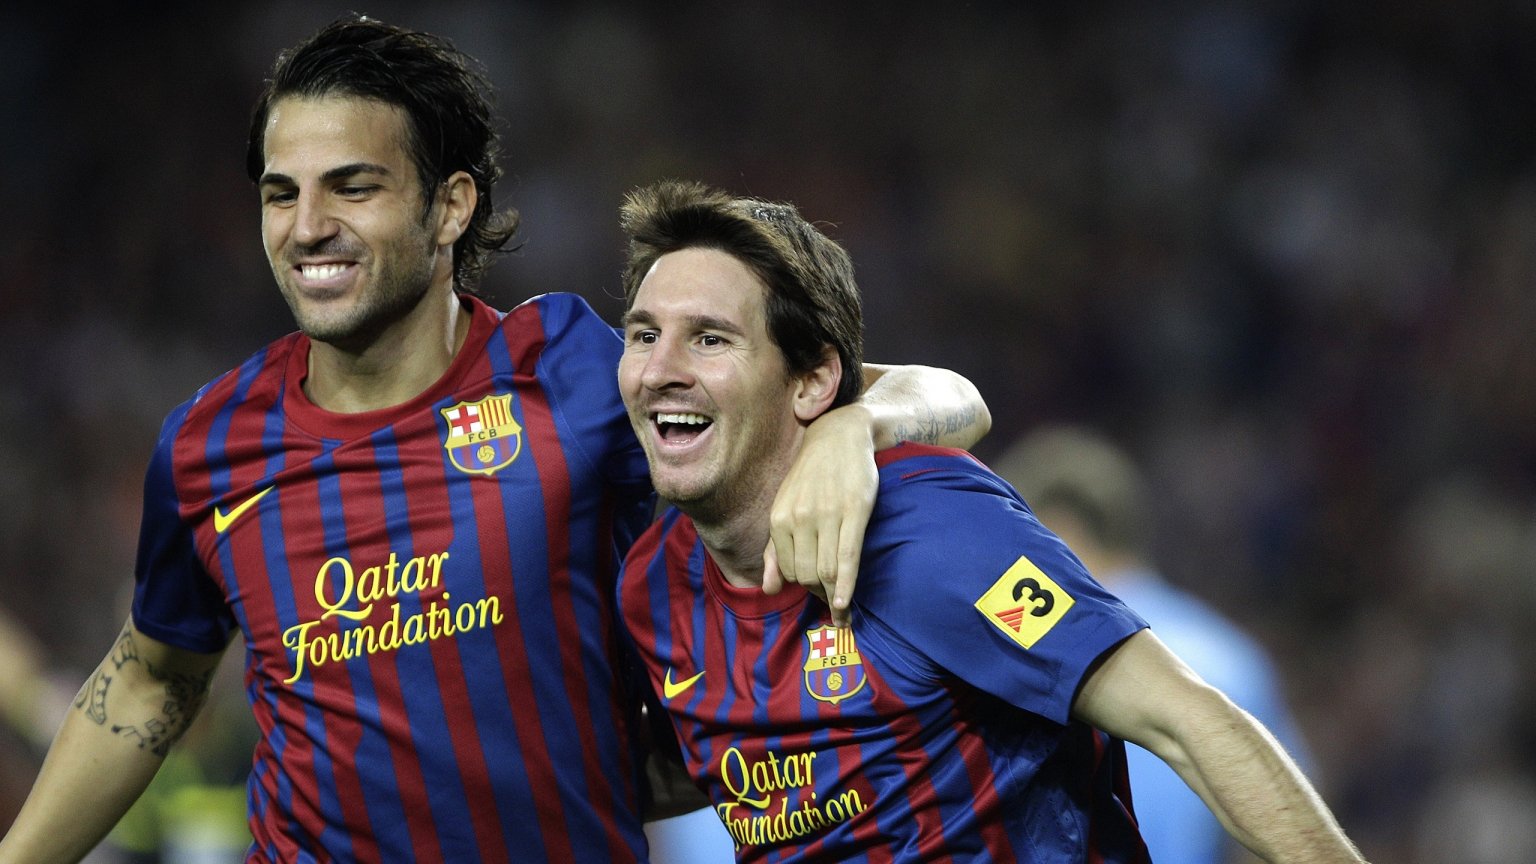 Cesc Fabregas and Lionel Messi for 1536 x 864 HDTV resolution